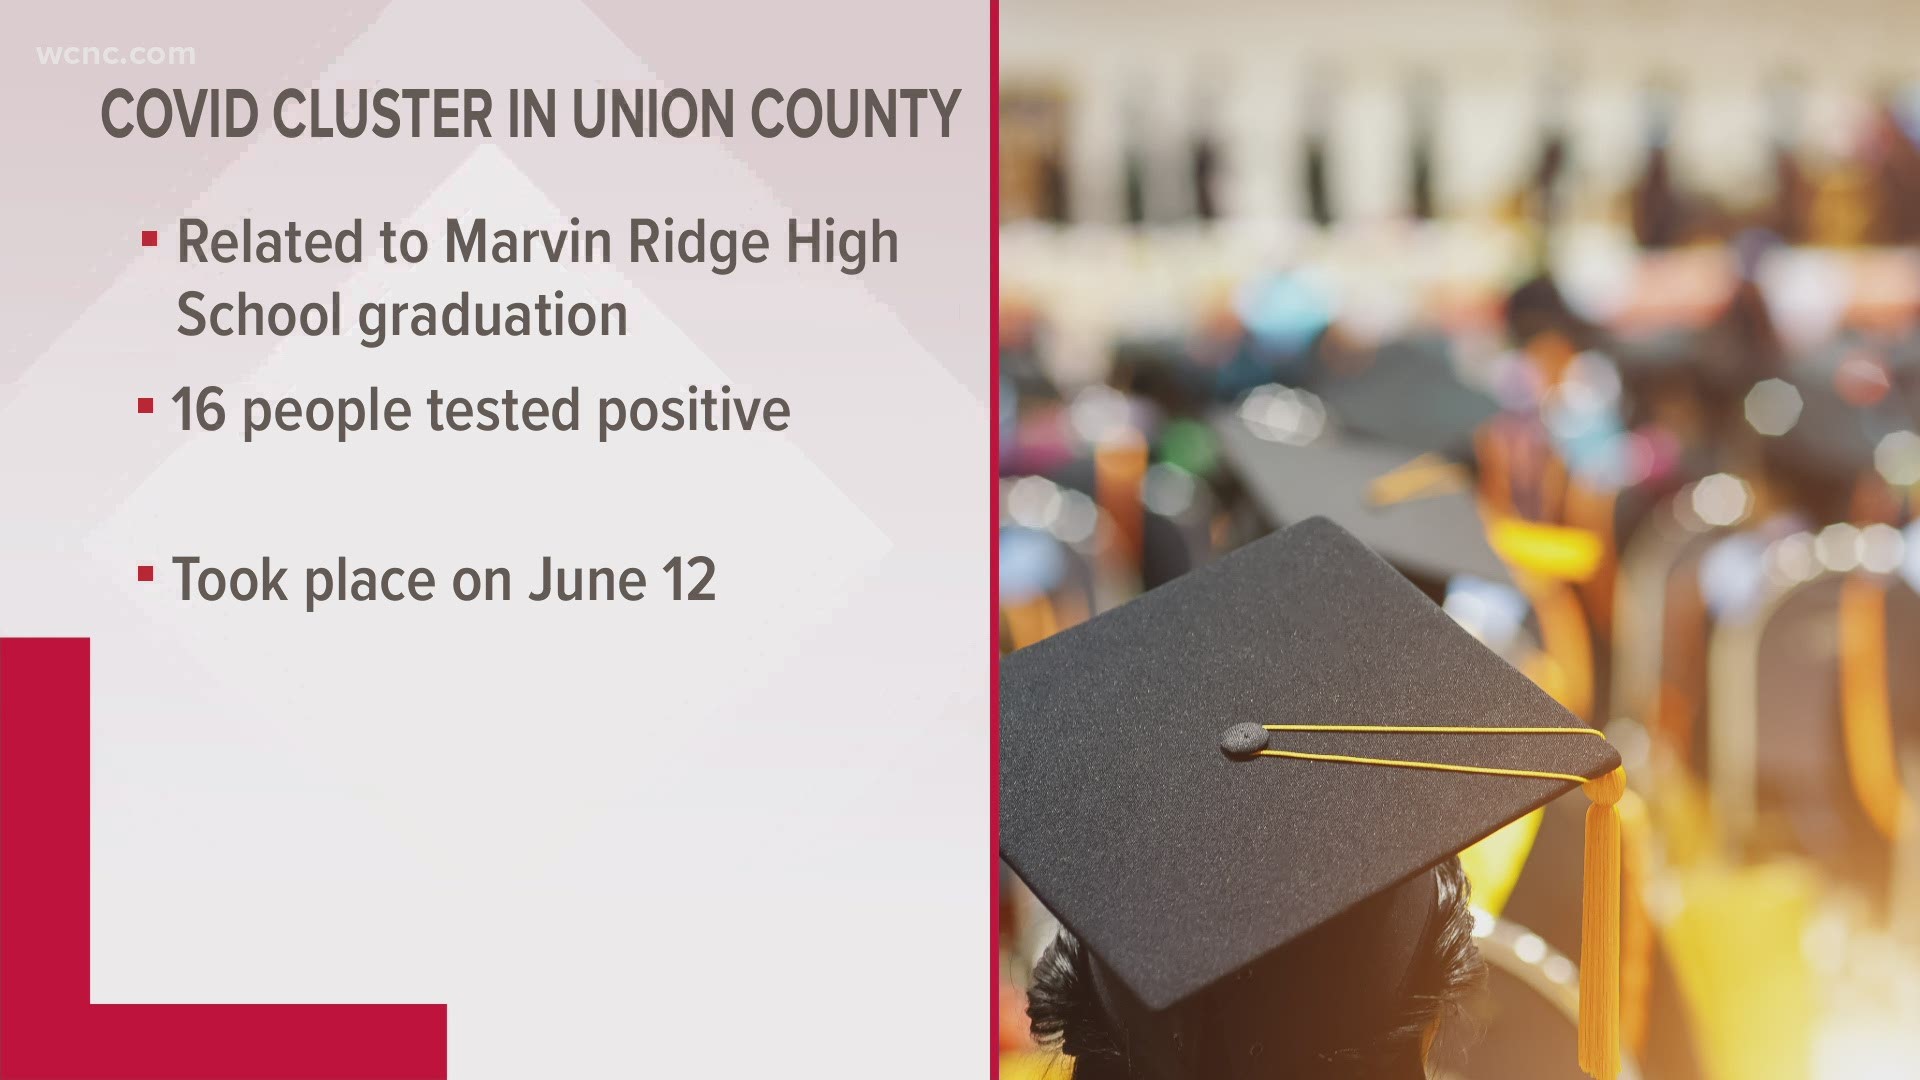 A graduation ceremony that took place on June 12th is now linked to a Marvin Ridge High School graduation as 16 people test positive.